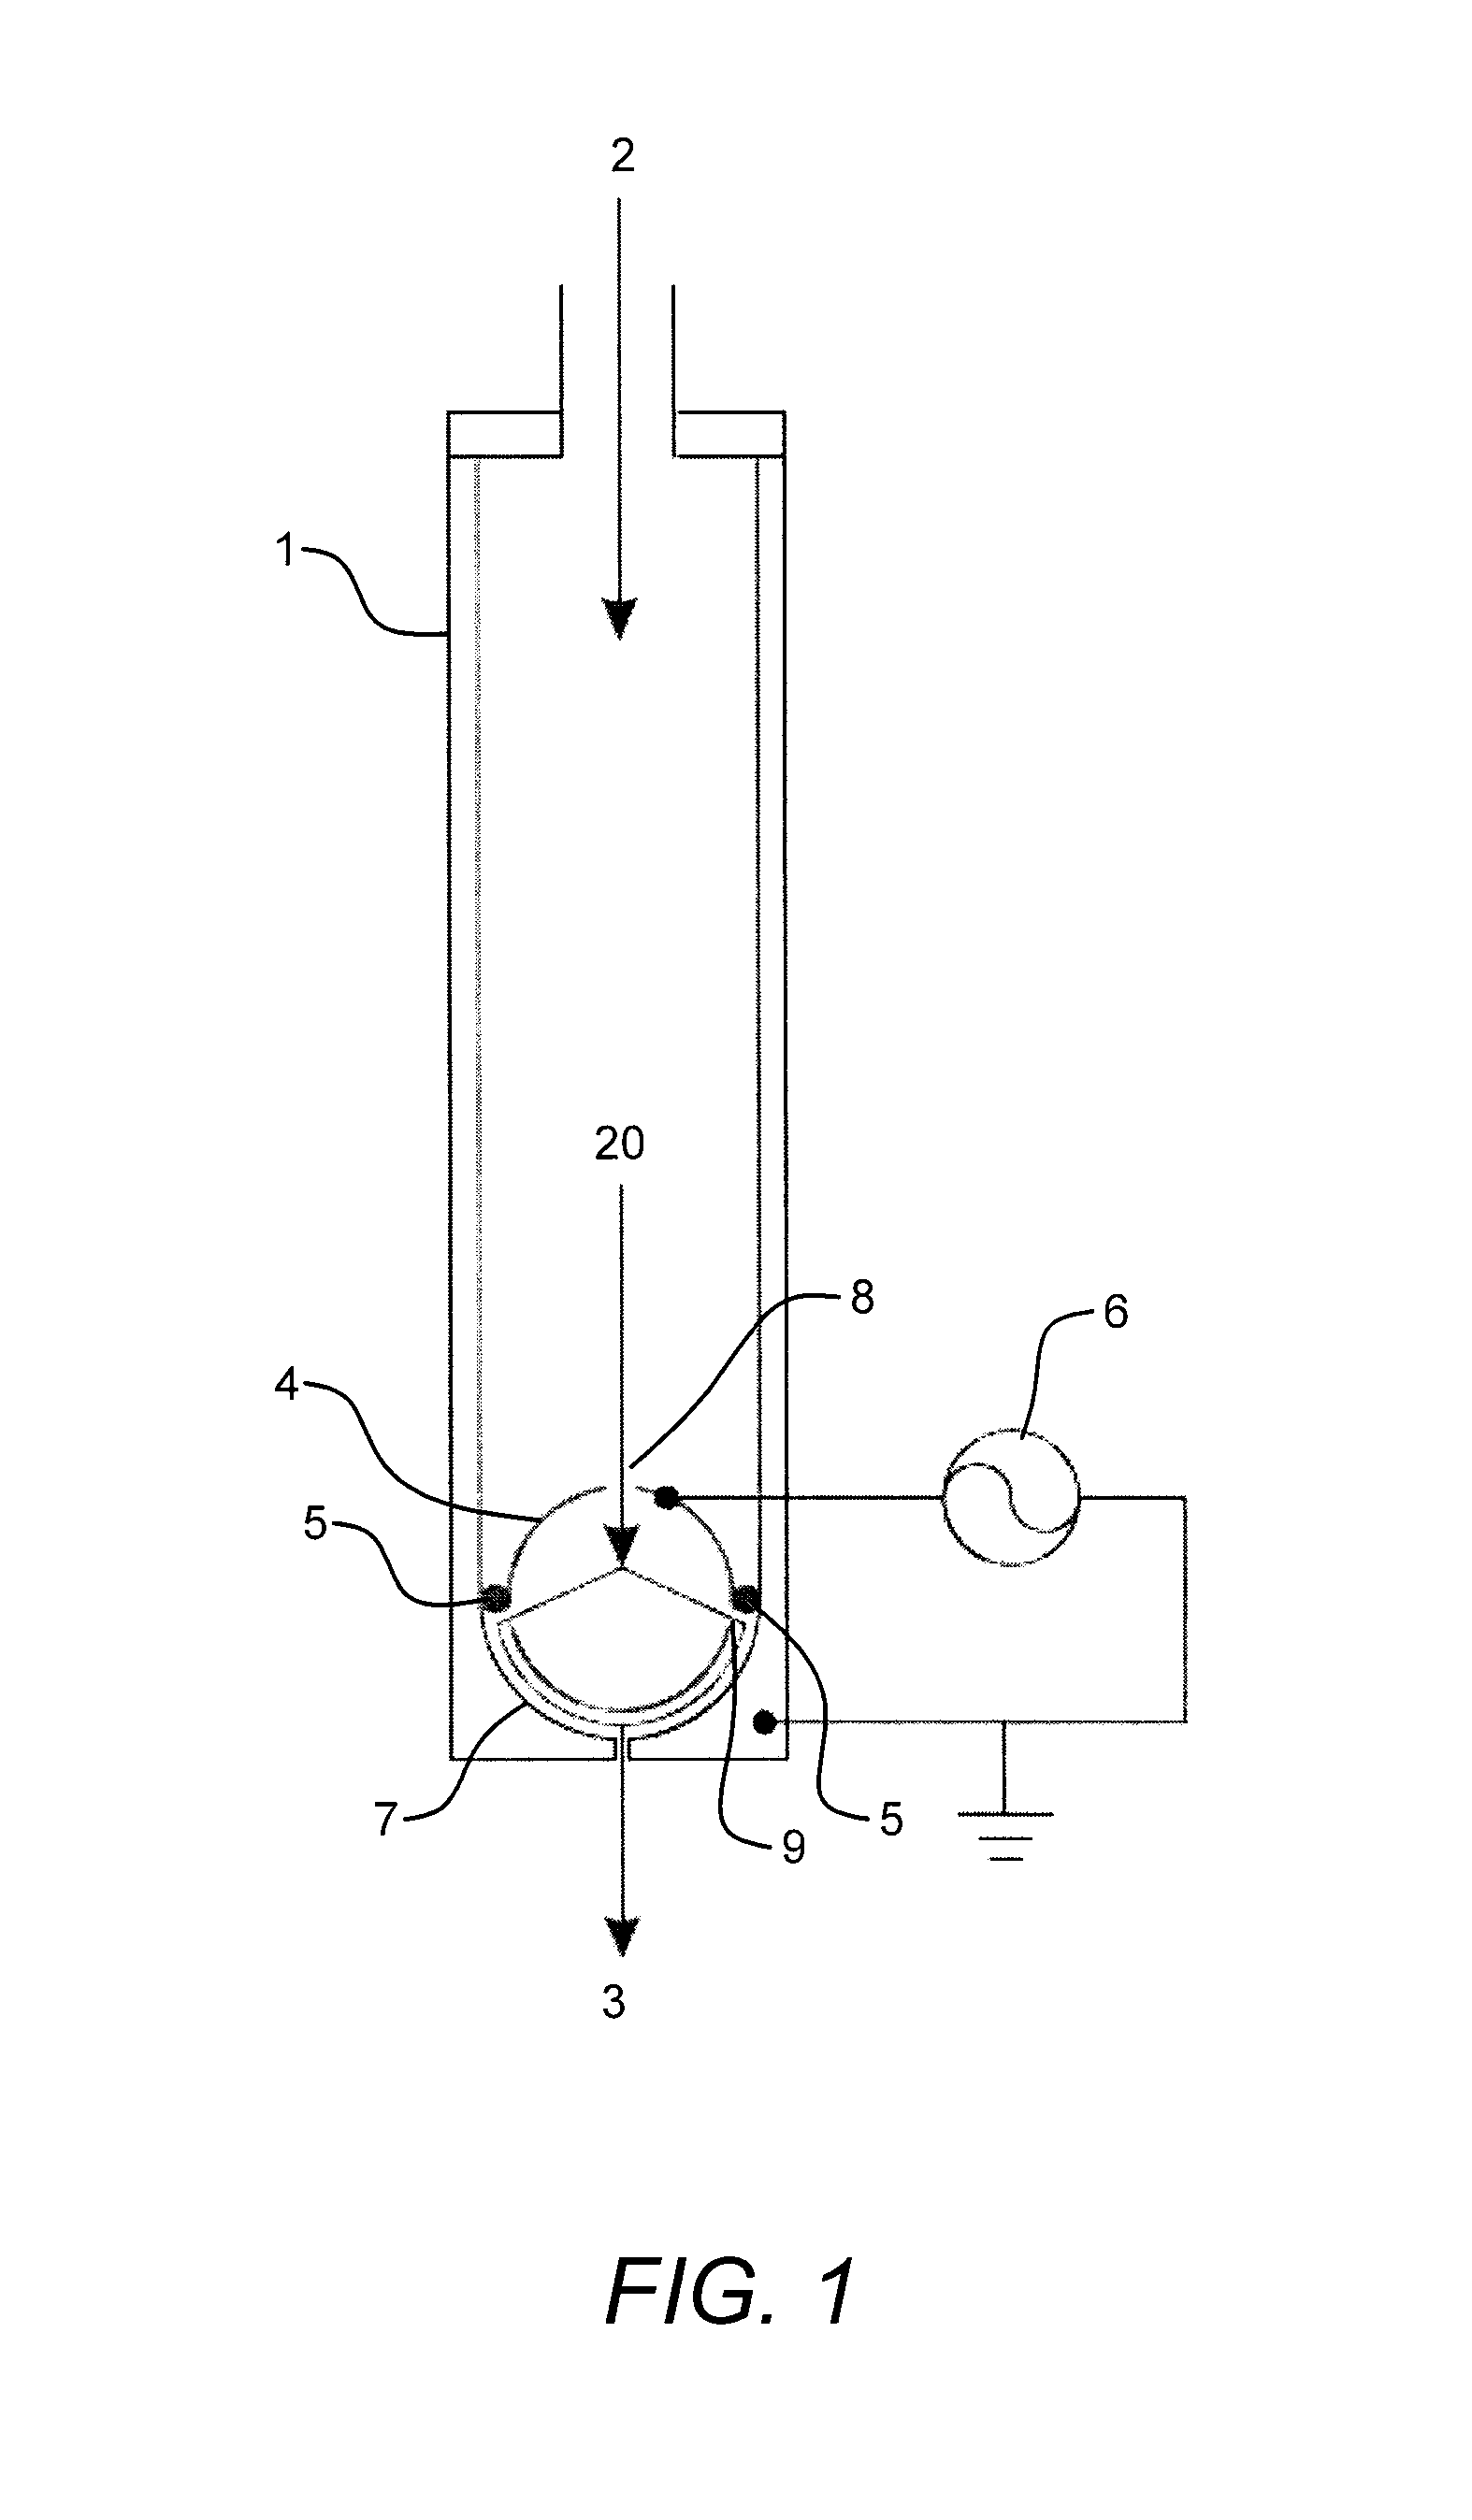 Low-temperature, converging, reactive gas source and method of use